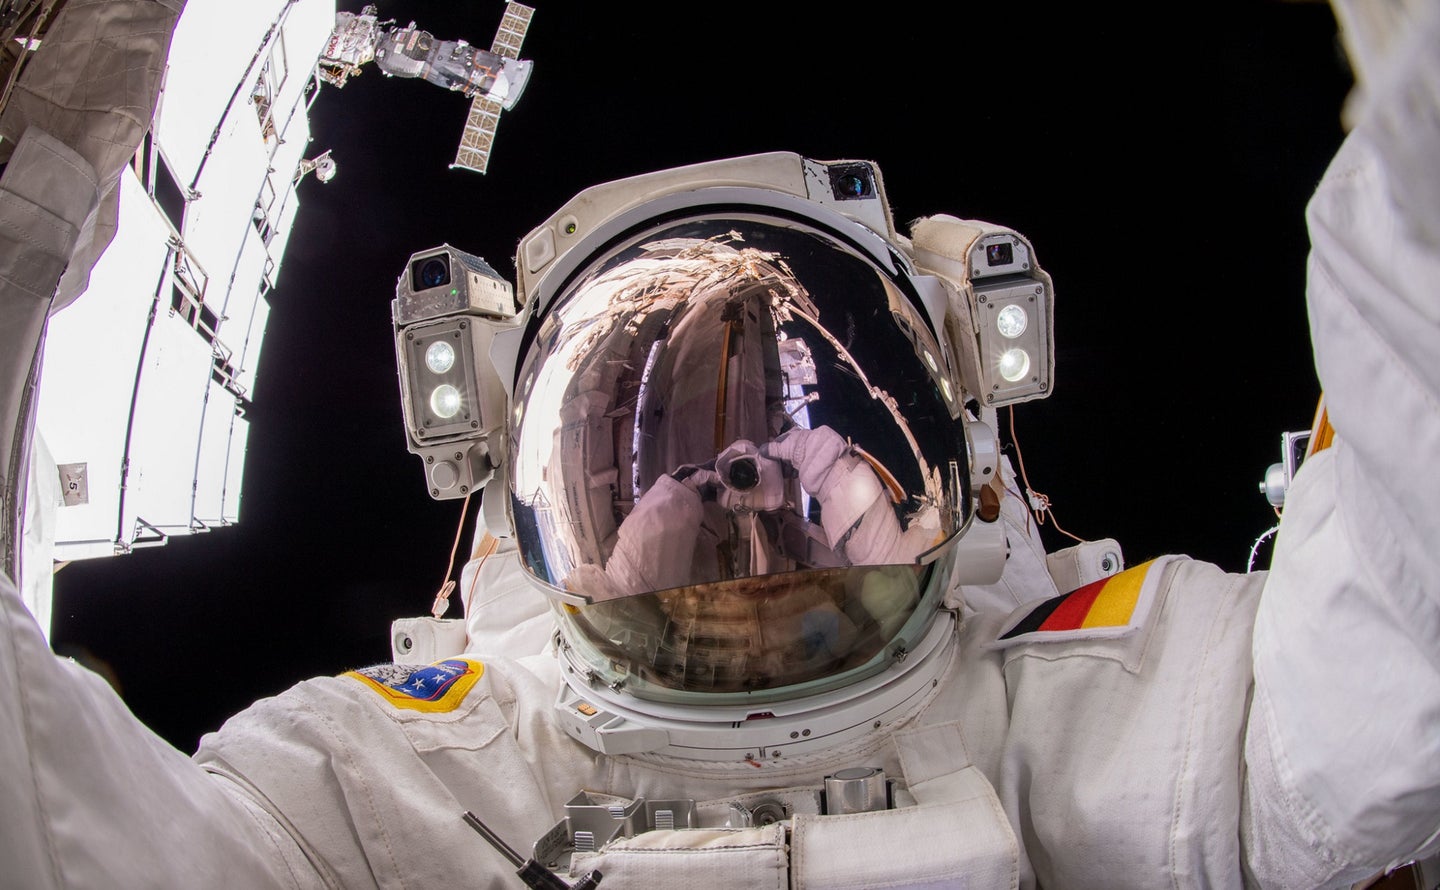 ISS astronaut taking selfie during space walk for social media